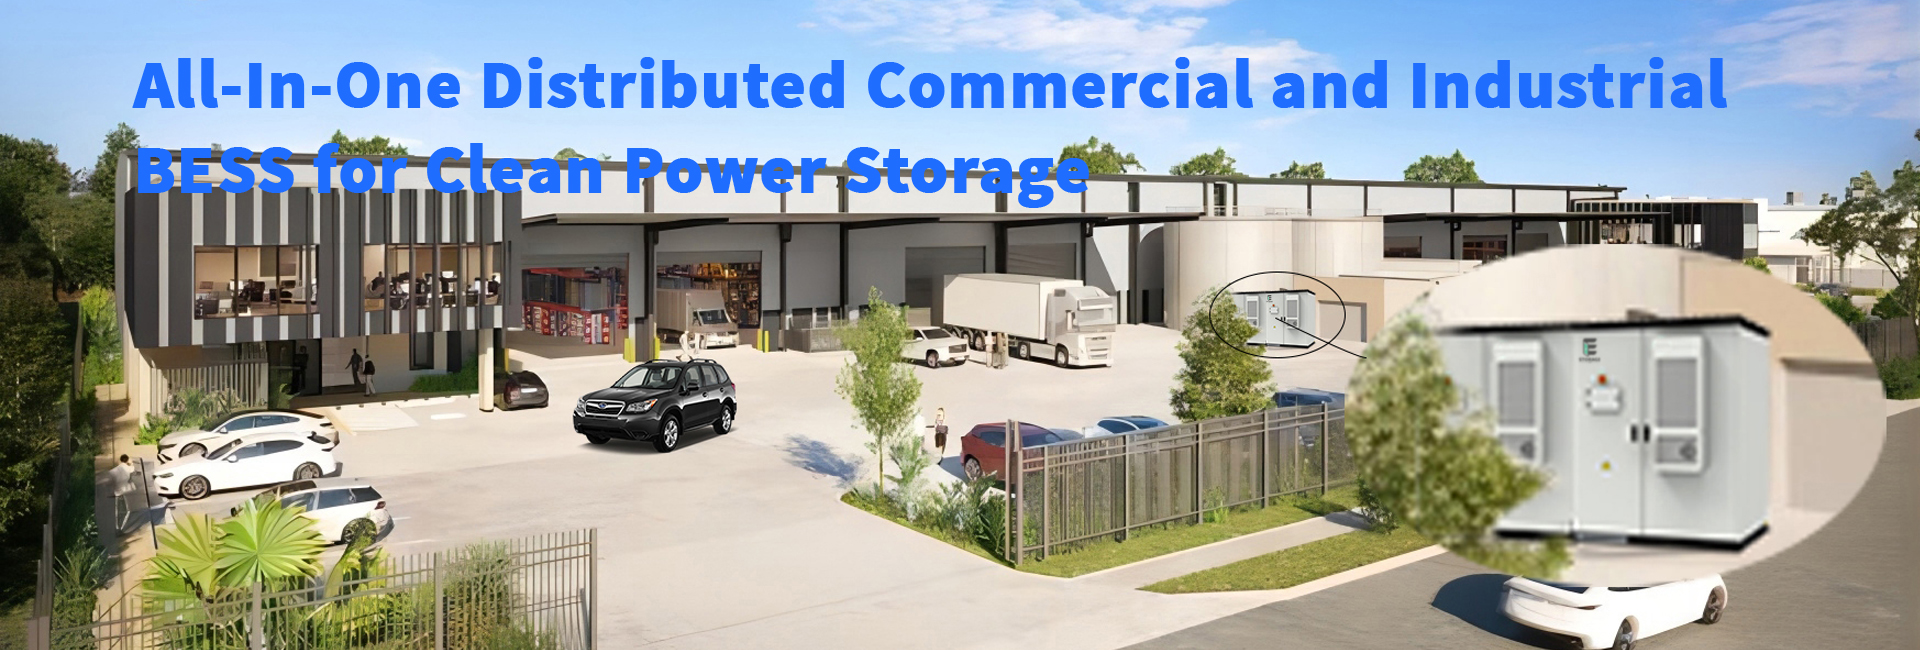 All-In-One Distributed Commercial and Industrial BESS for Clean Power Storage